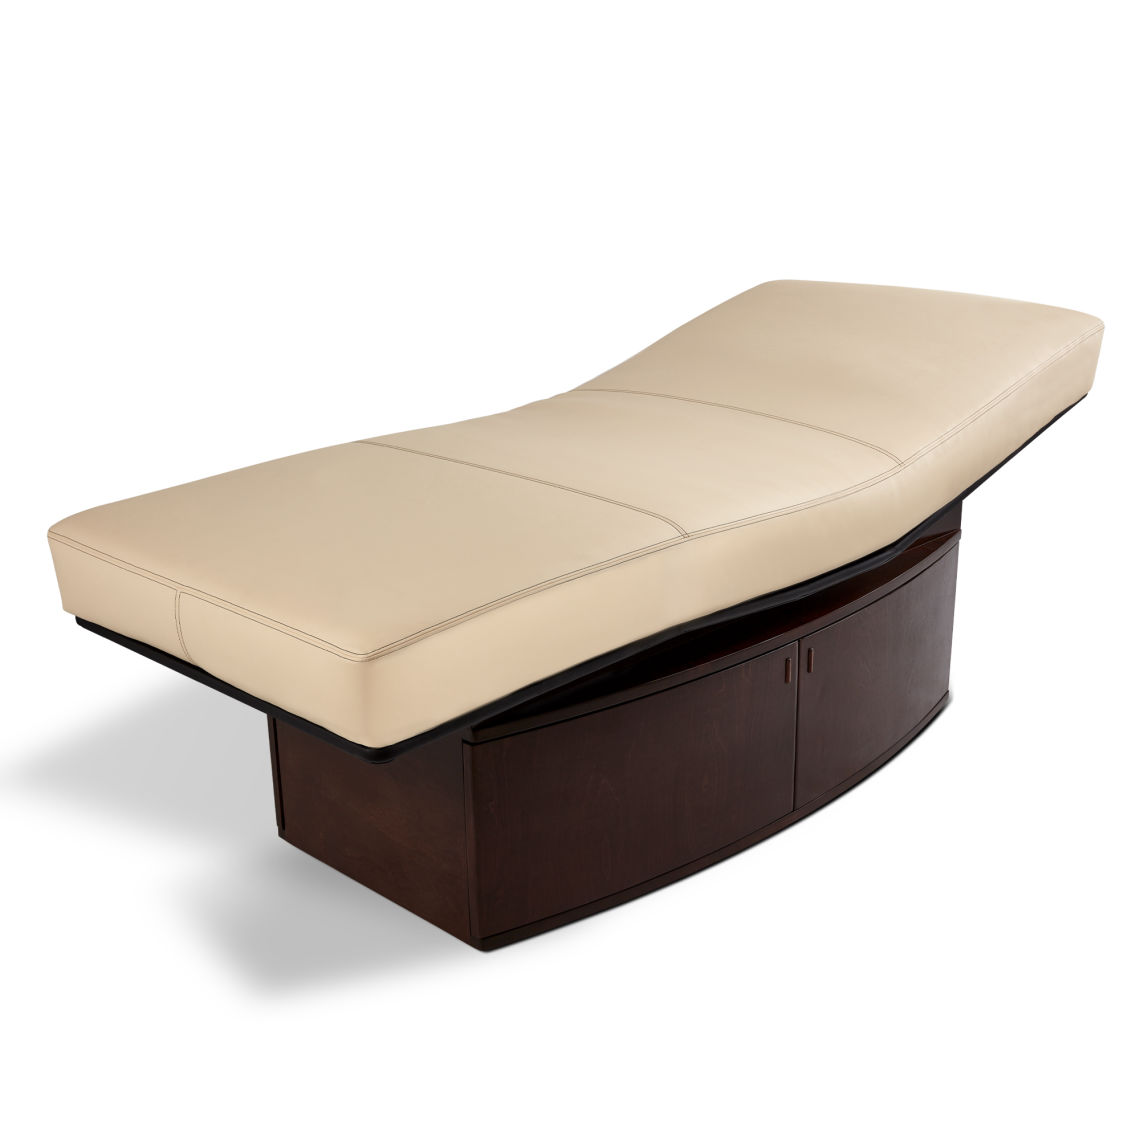 Spavision | Insignia Horizon™ Multi-purpose treatment table with replaceable mattress